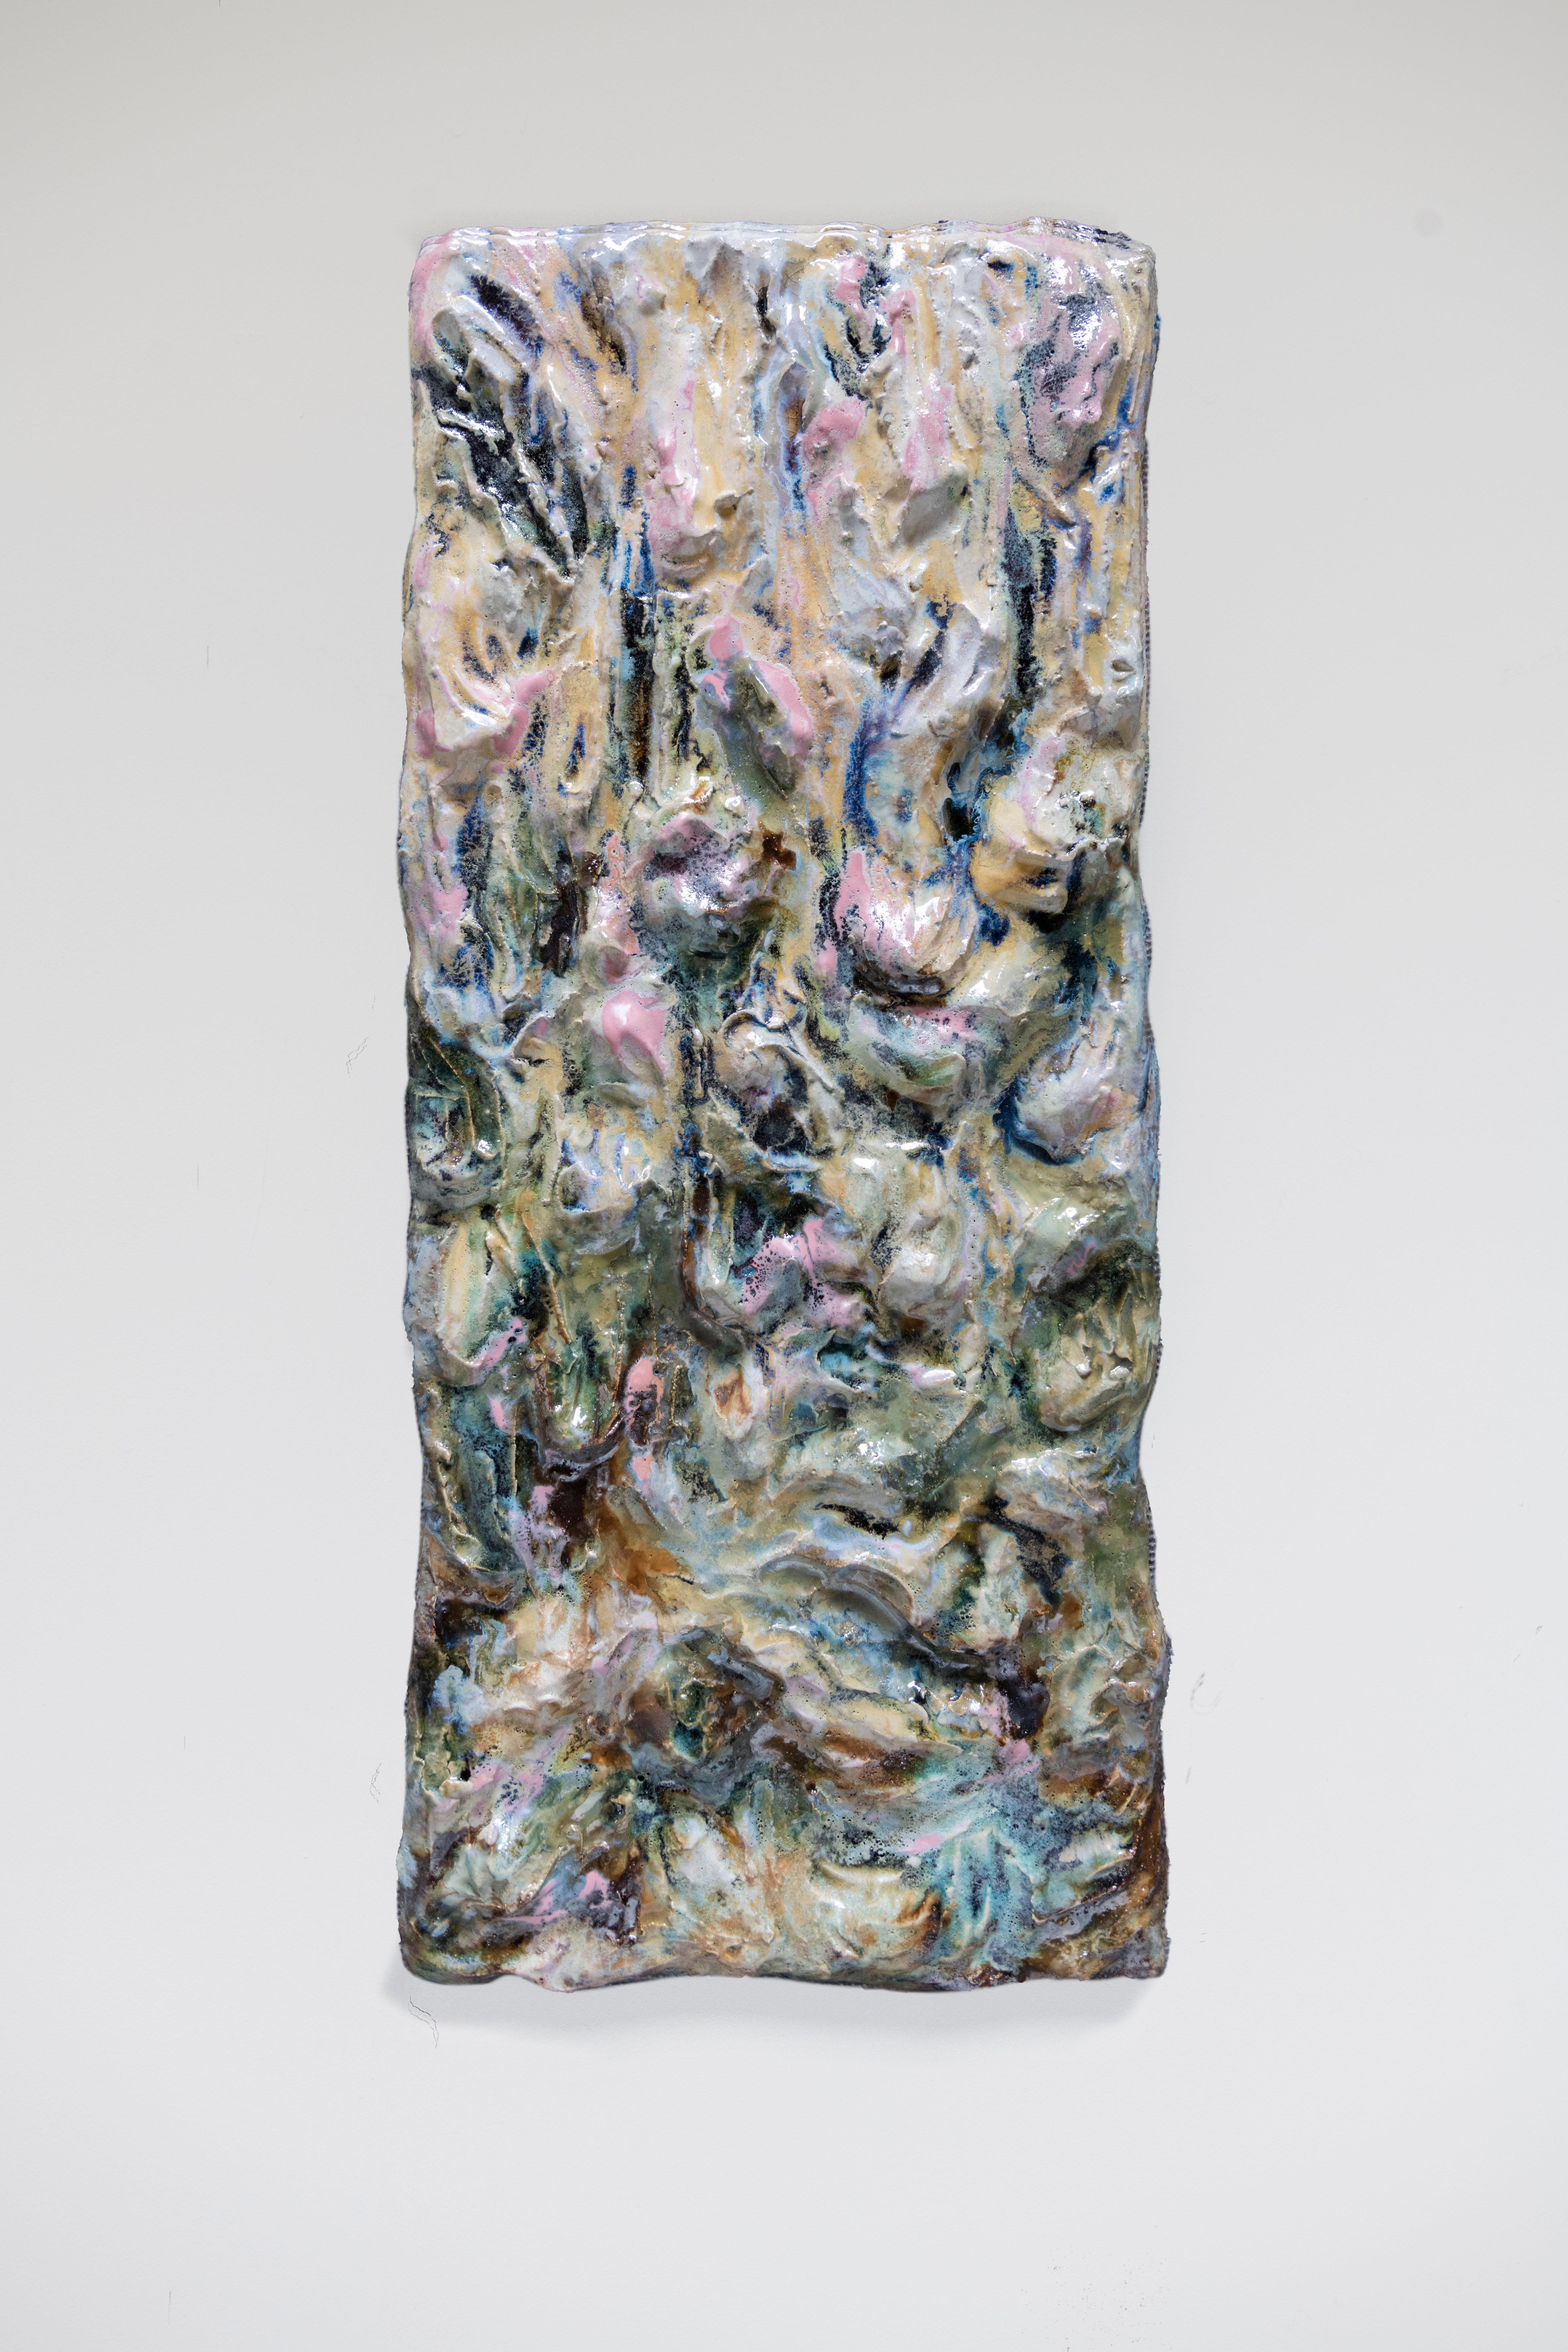 Sensing The Landscape wall sculpture by Natasja Alers, 2021
Dimensions: 104 x 44 cm
Material: ceramics, glazes

Visual artist Natasja Alers (The Hague, 1987) graduated from the Gerrit Rietveld Academy in the field of ceramics. Alers makes casts